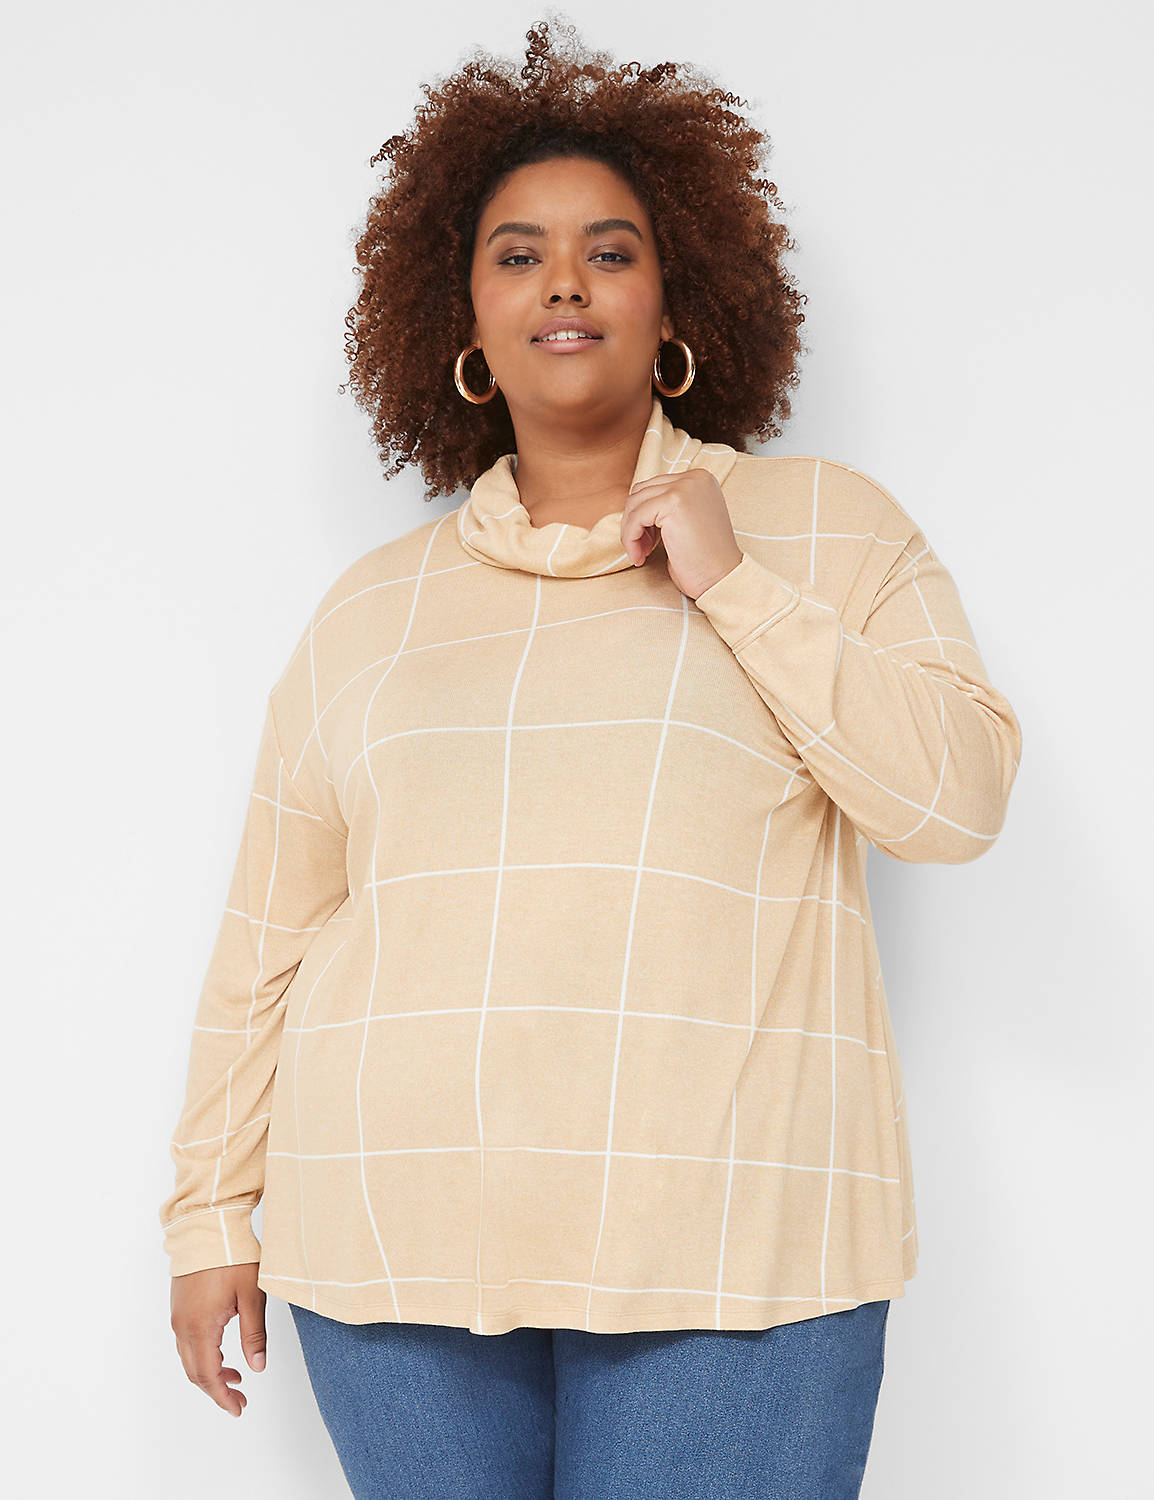 Relaxed Long Sleeve Funnel Neck Swe Product Image 1